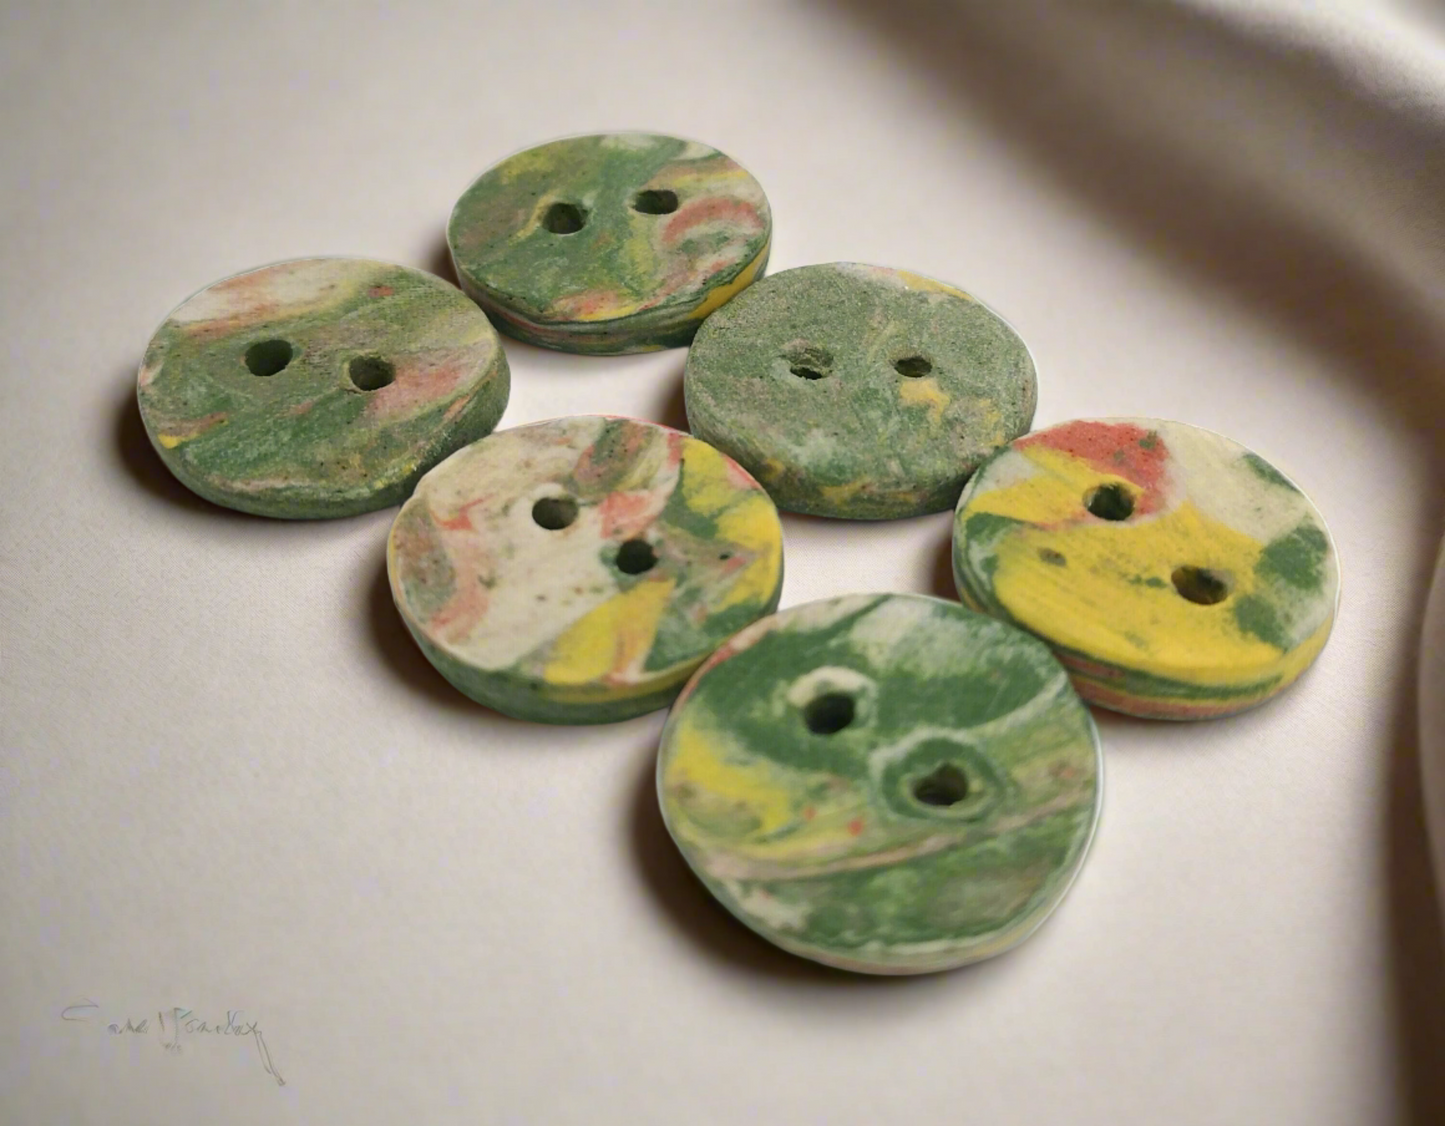 Set of 6 25mm Handmade Ceramic Sewing Buttons - Novelty Craft Buttons, Customizable Unique Backpack & Coat Embellishments